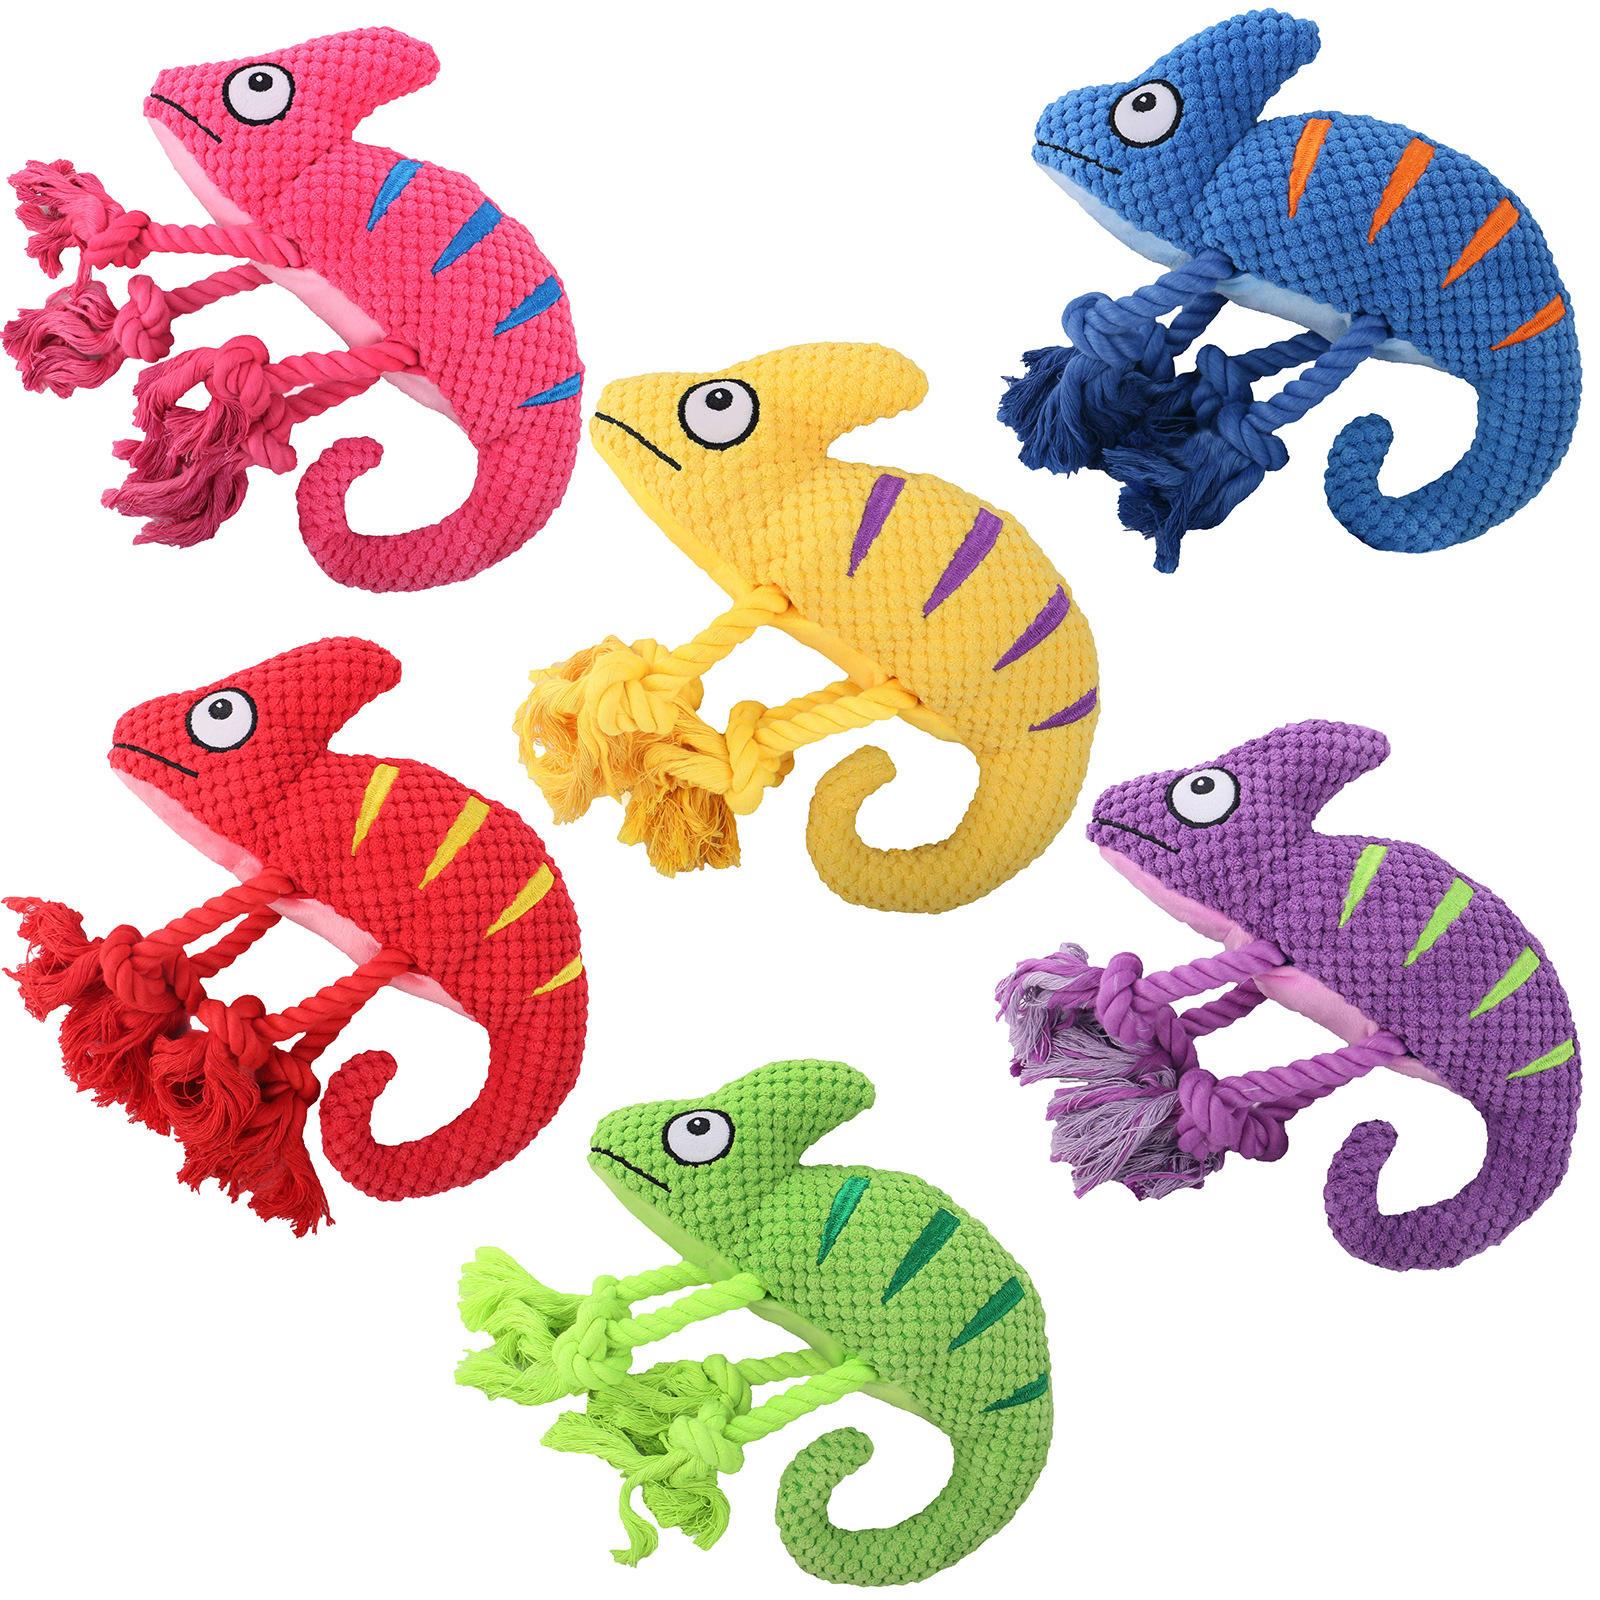 Chameleon Knot Squeaky Stuffed Animal Interactive Dog Toy Dog Chew Toy